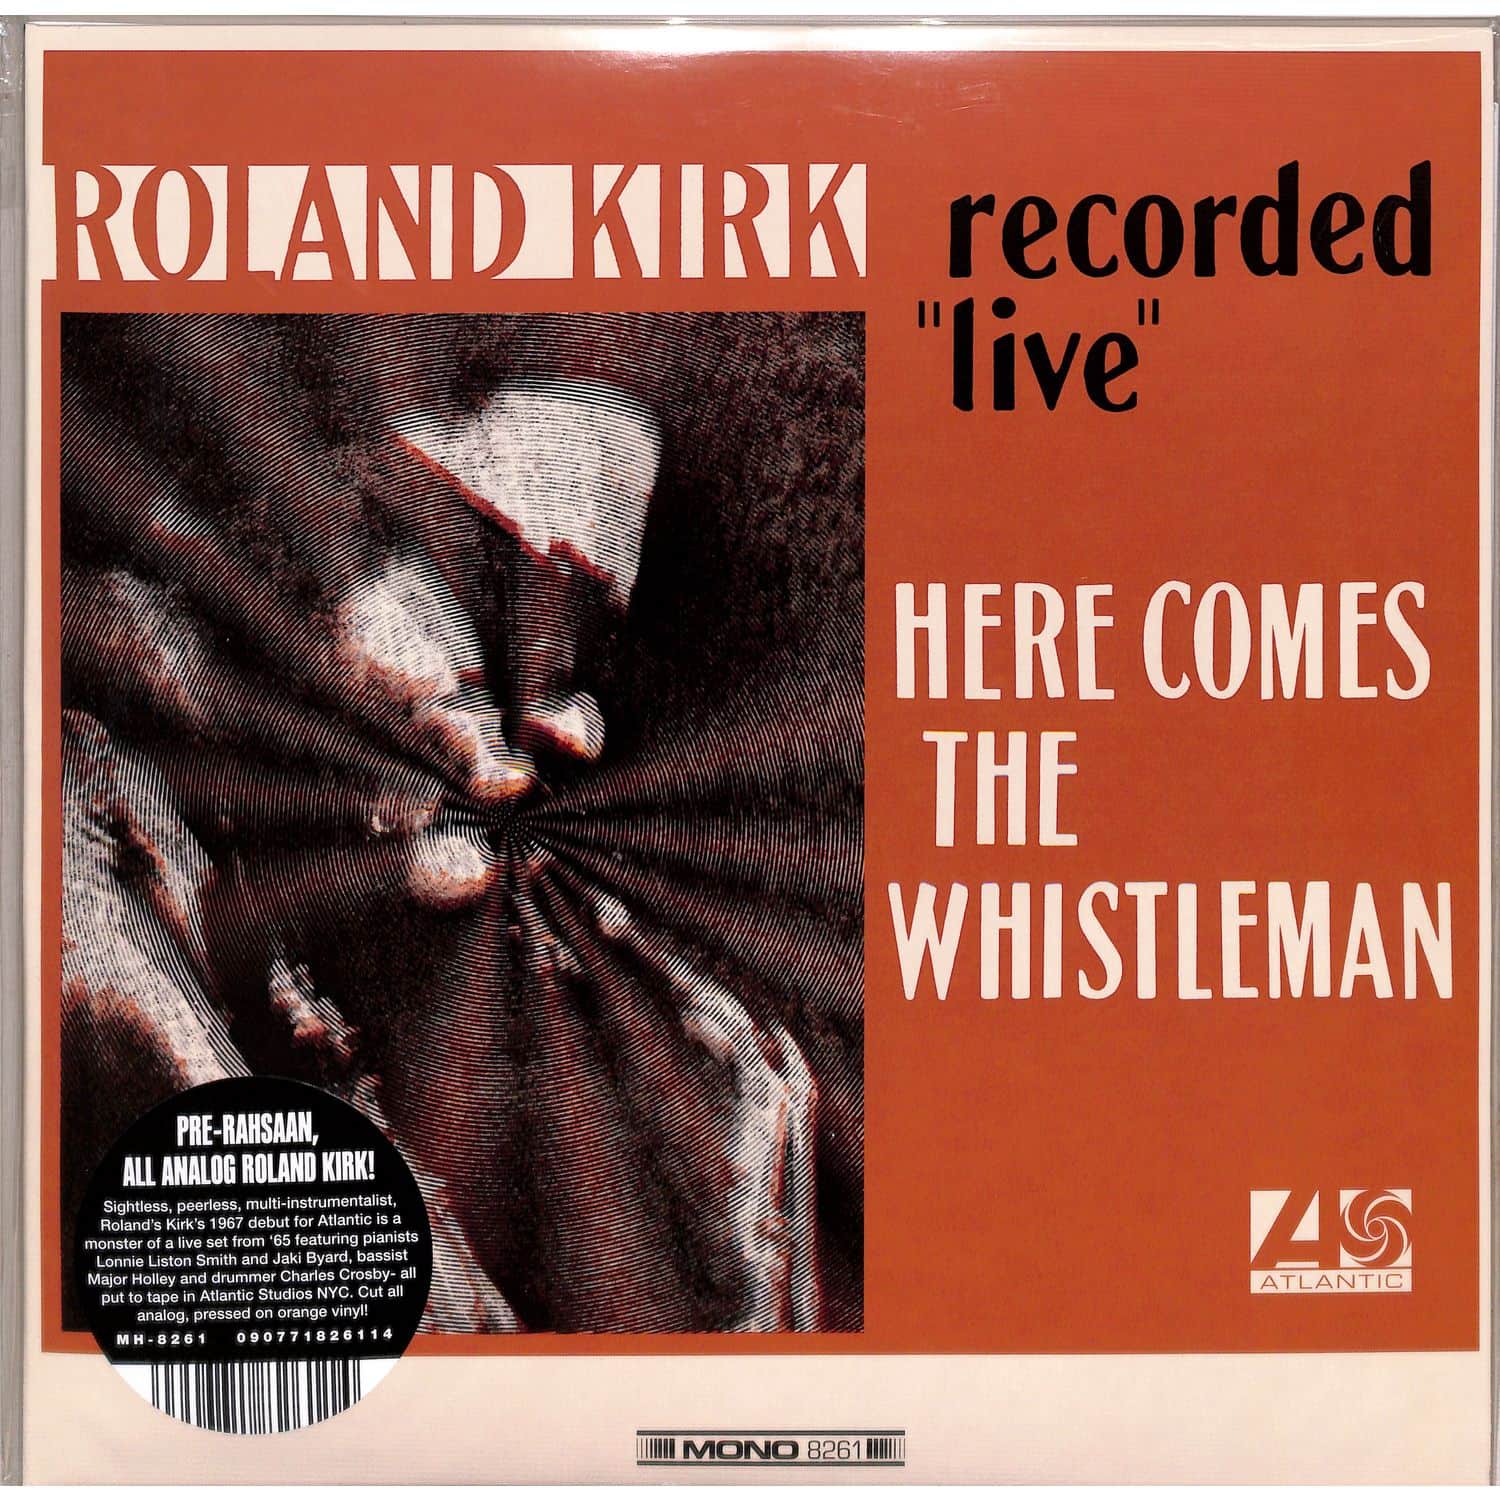 Roland Kirk - HERE COMES THE WHISTLEMAN 